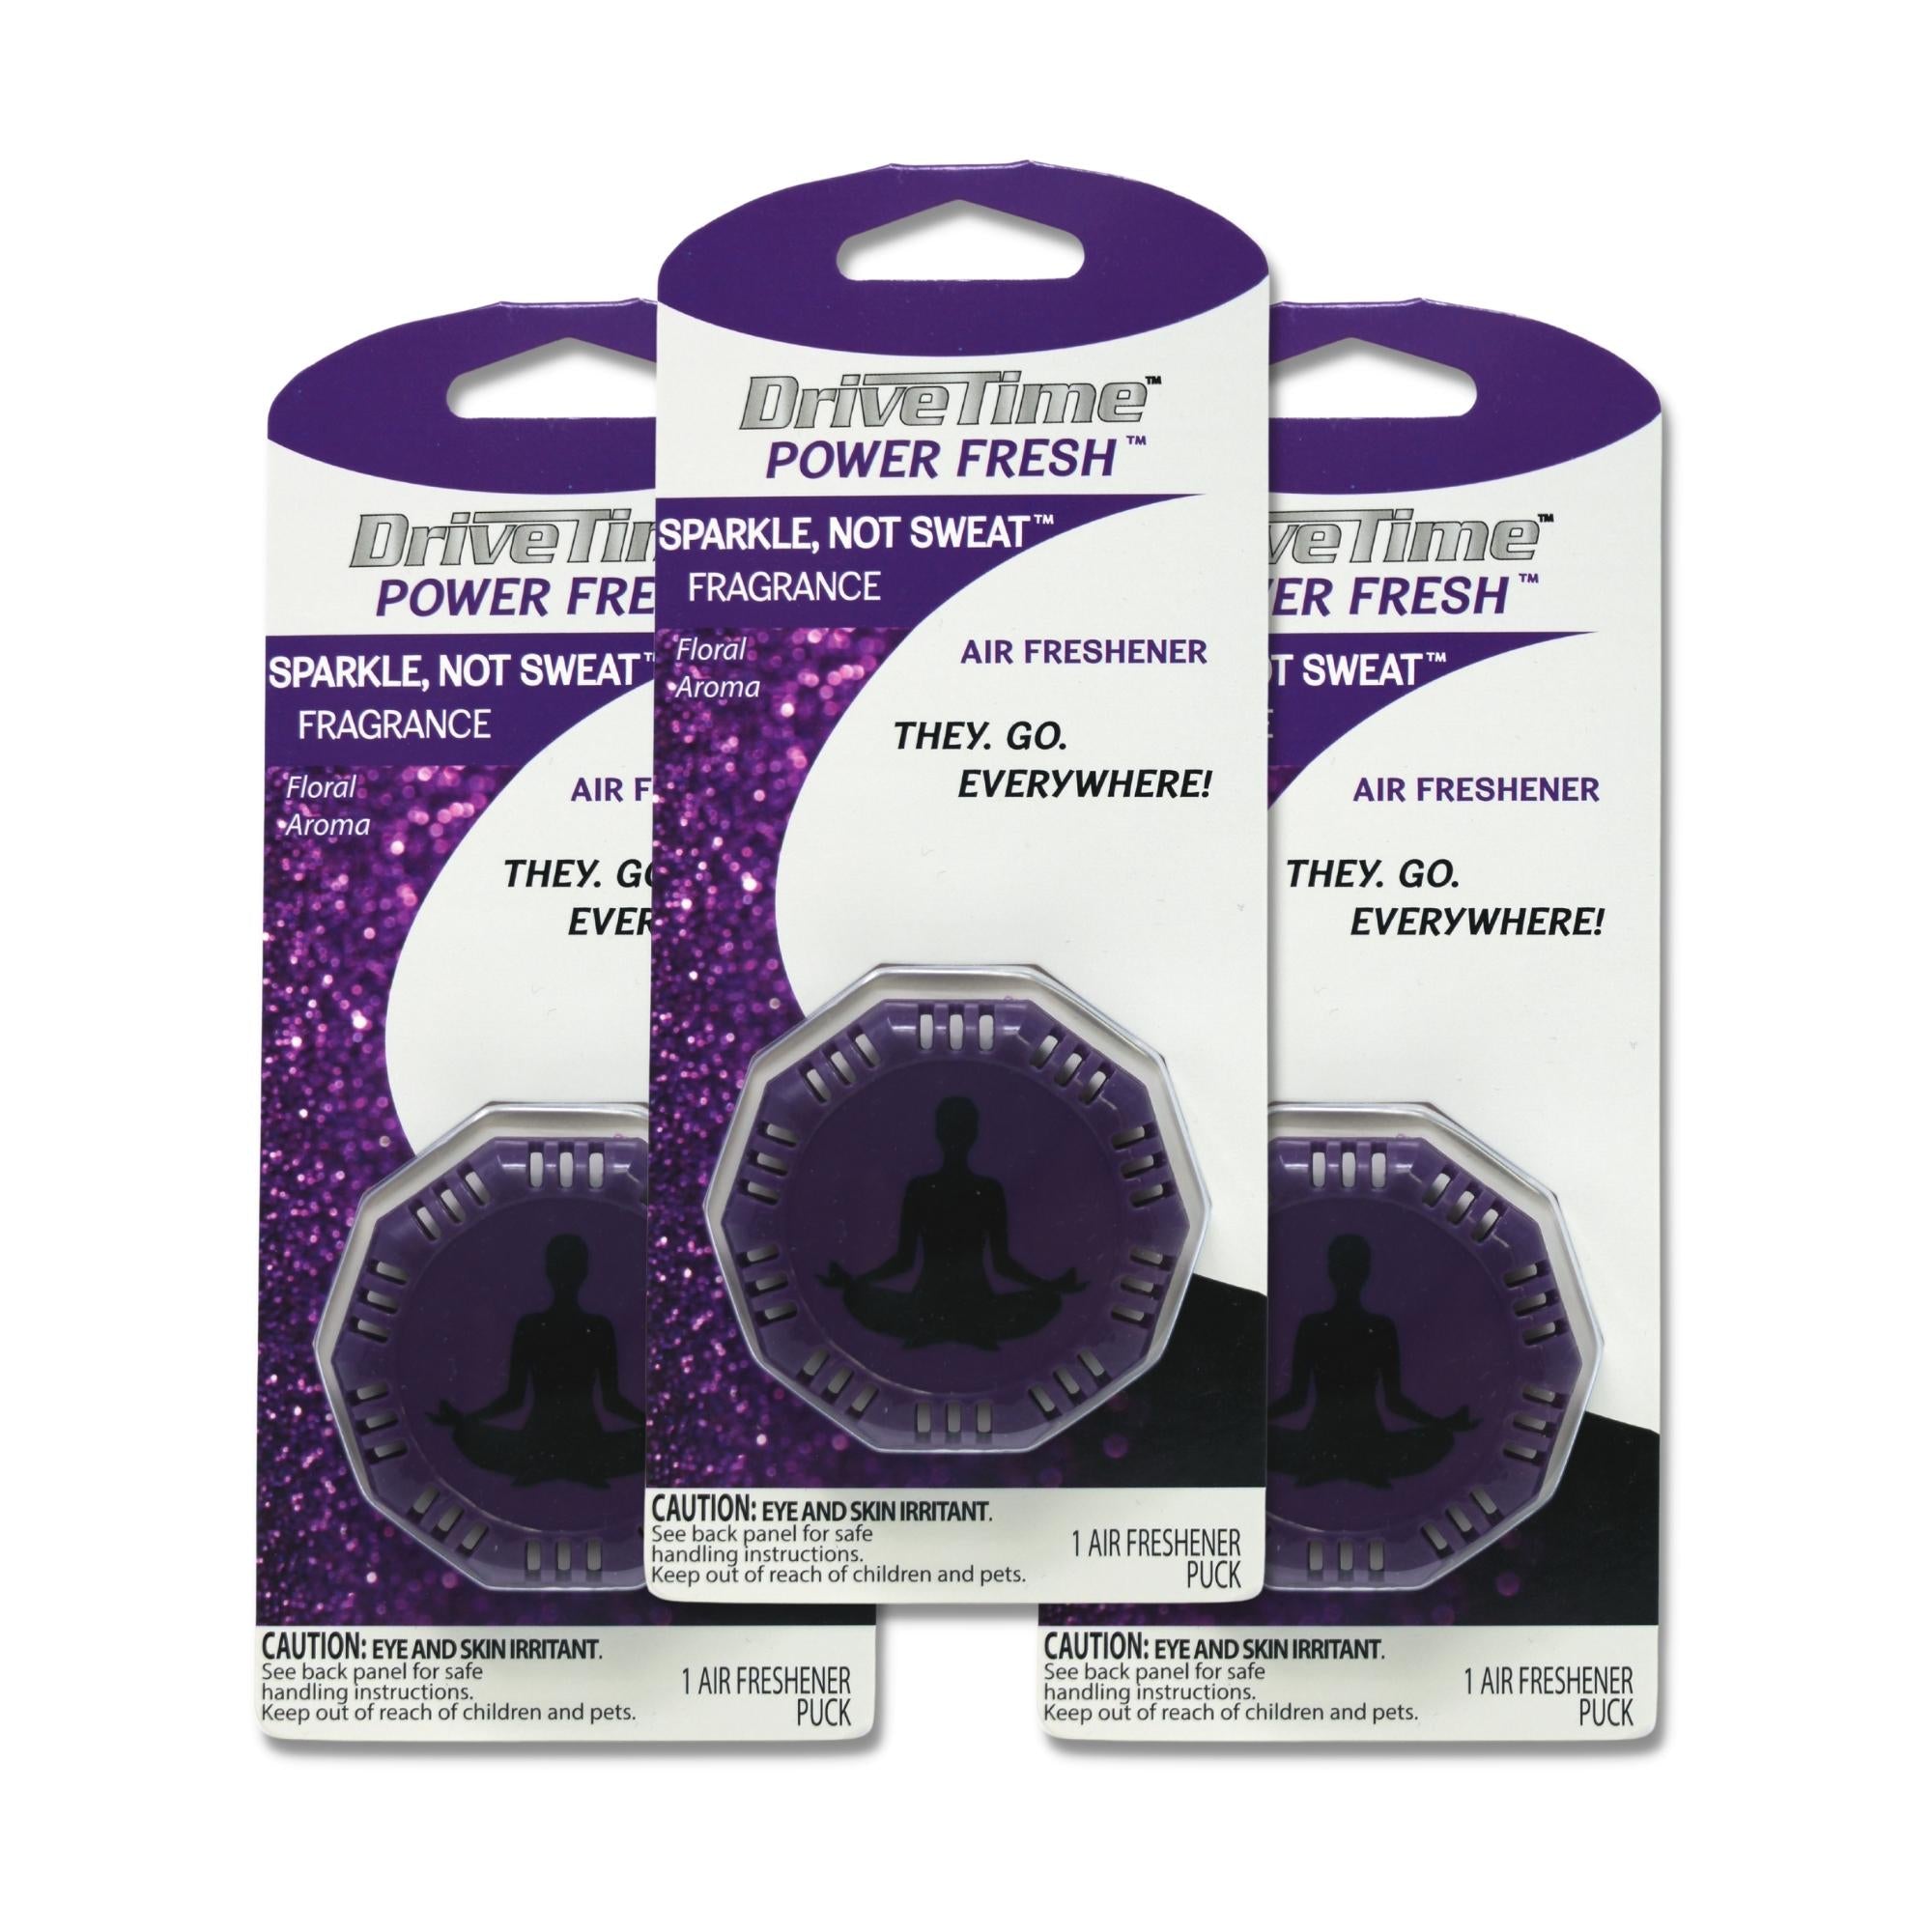 Power Fresh® Portable Air Fresheners (Single and 3-Pack Bundle Options) 3-Pack Sparkle Not Sweat™ Vehicle Air Fresheners